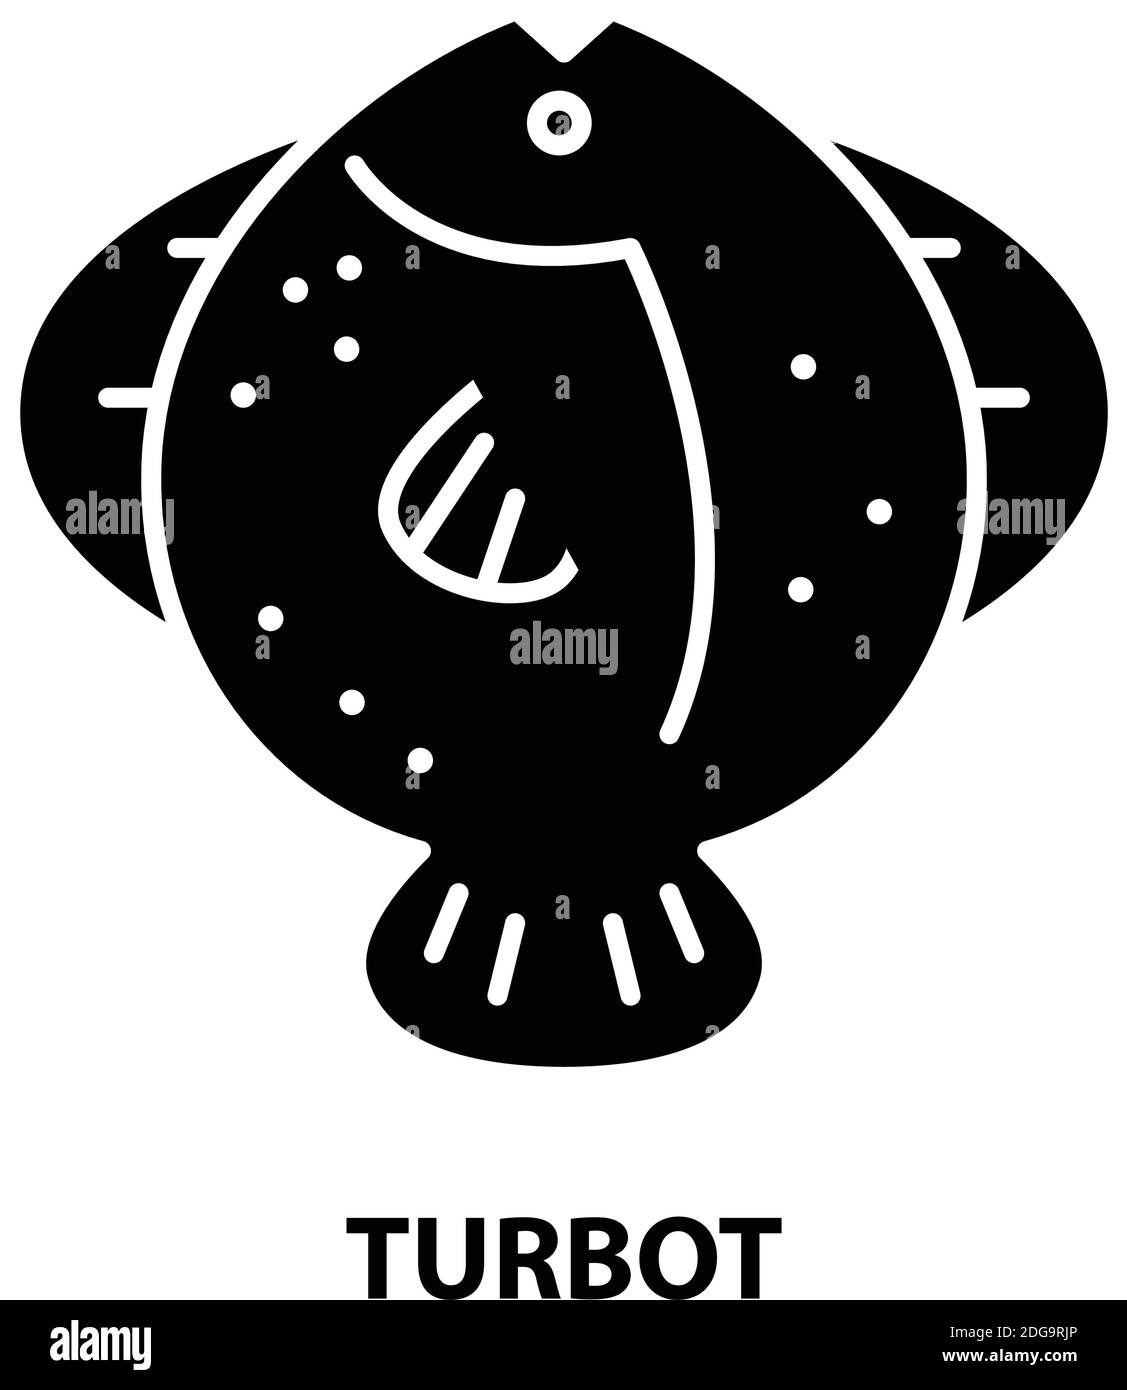 turbot icon, black vector sign with editable strokes, concept illustration Stock Vector